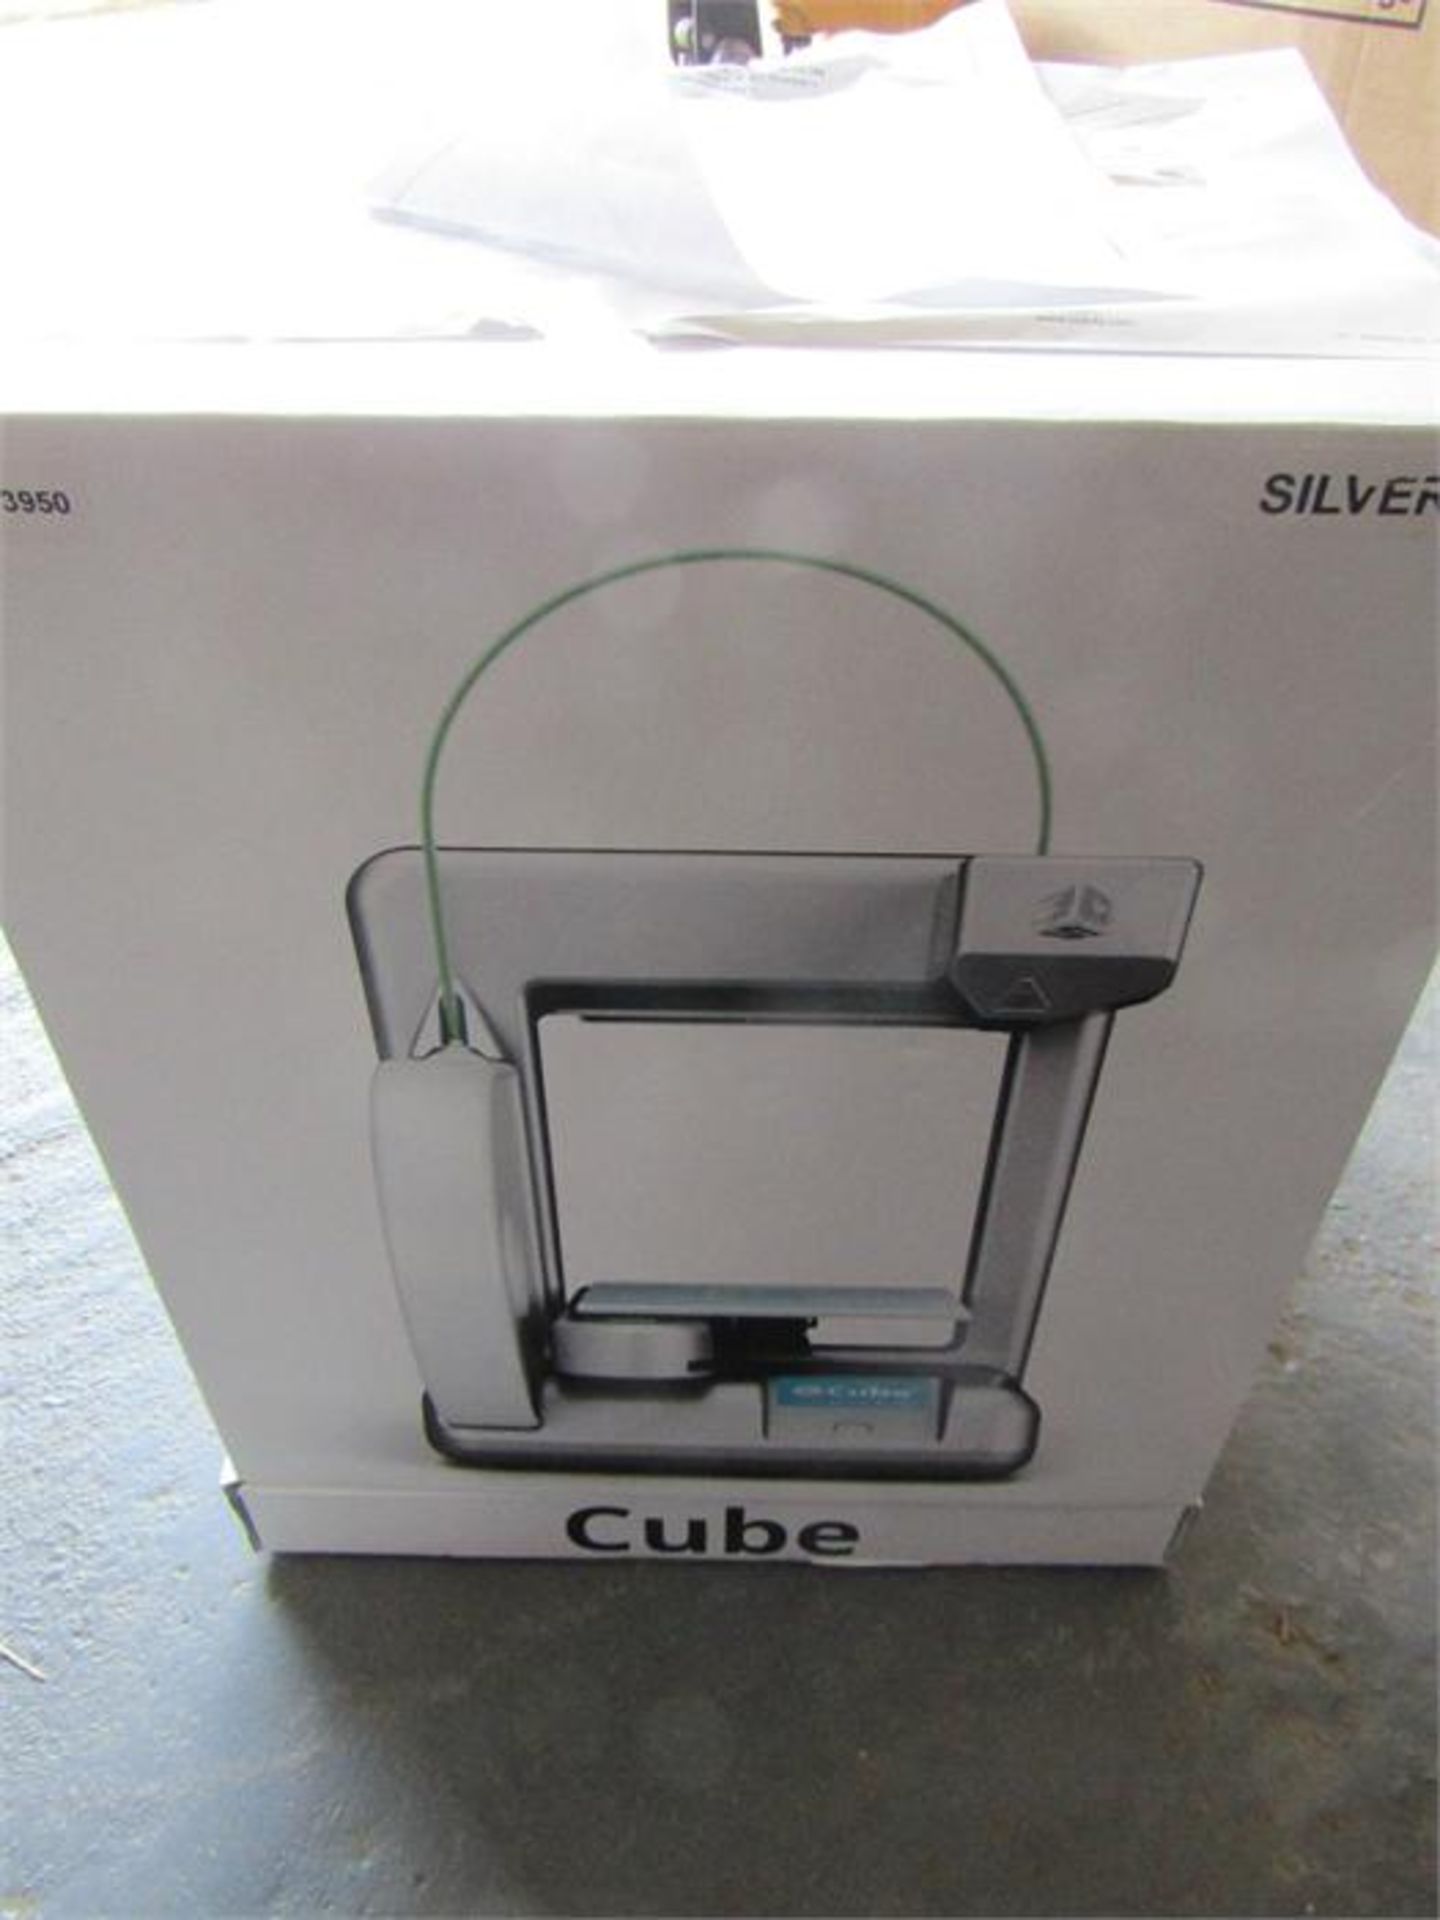 NEW & BOXED 3D Systems 2nd Gen Cube 3D Printer - Image 2 of 5